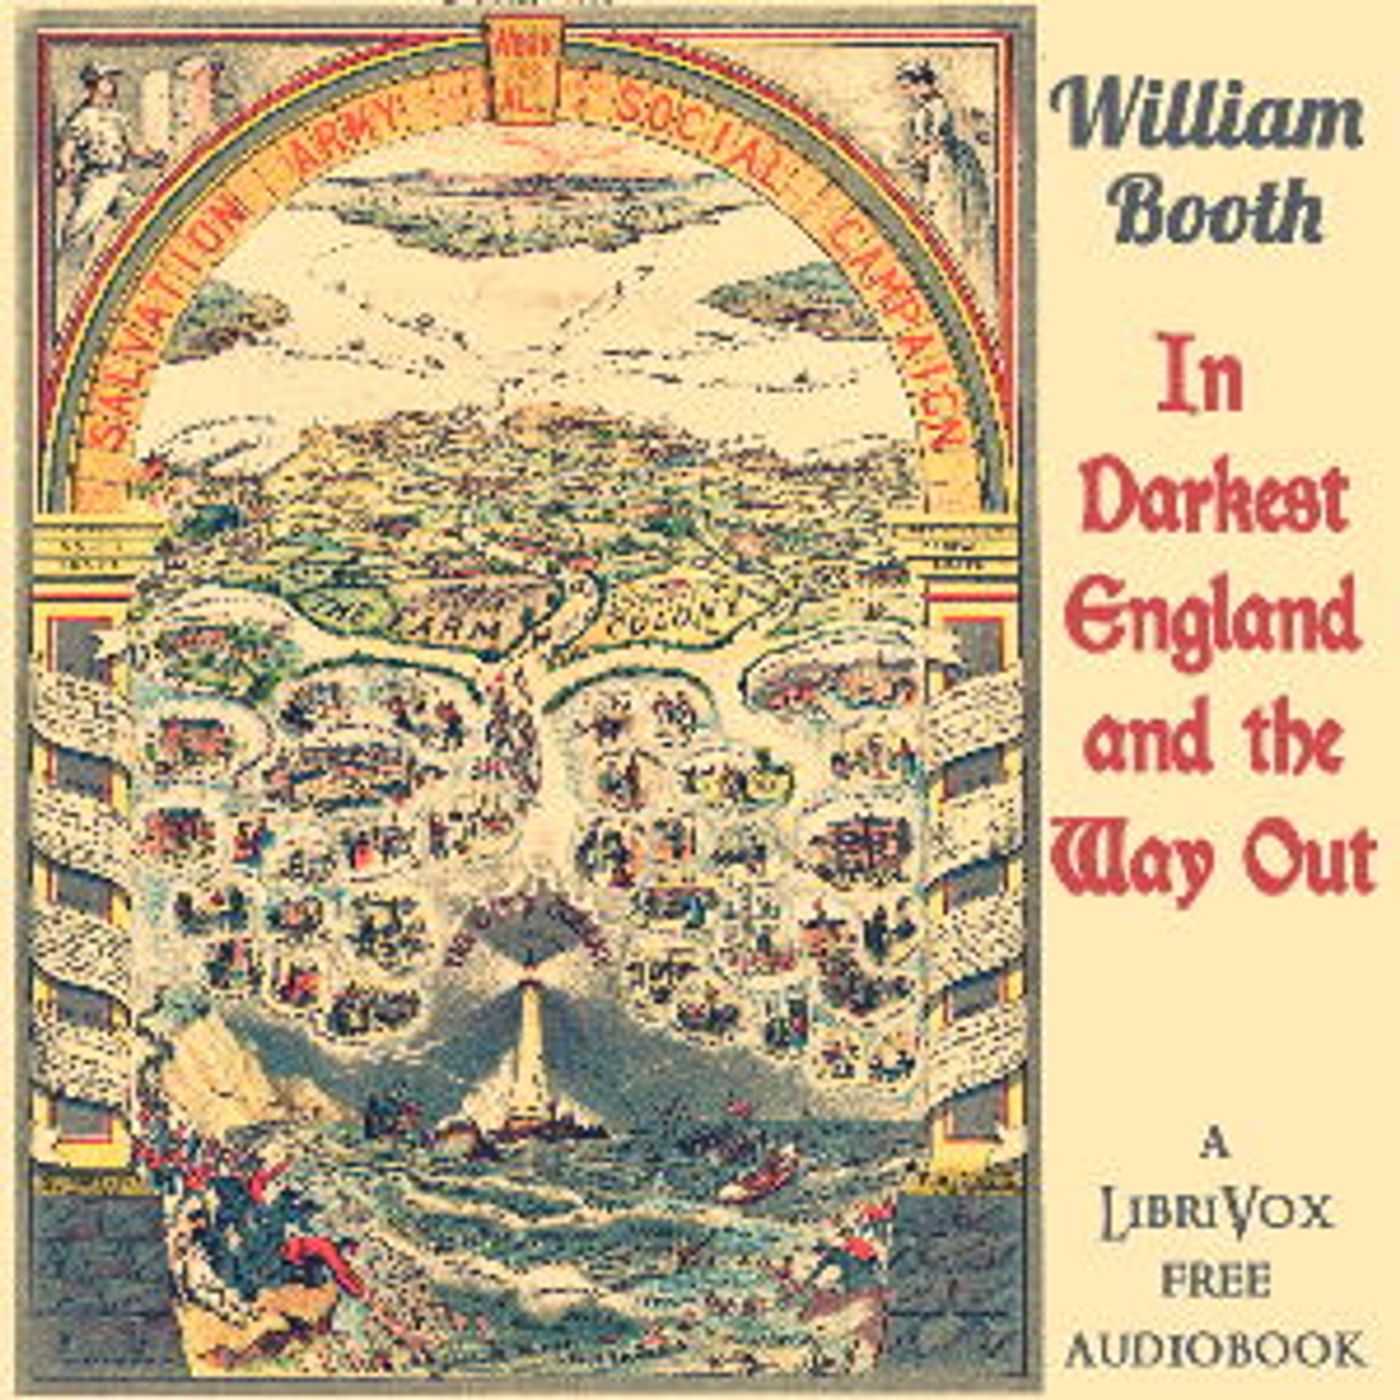 In Darkest England and the Way Out by William Booth (1829 – 1912)